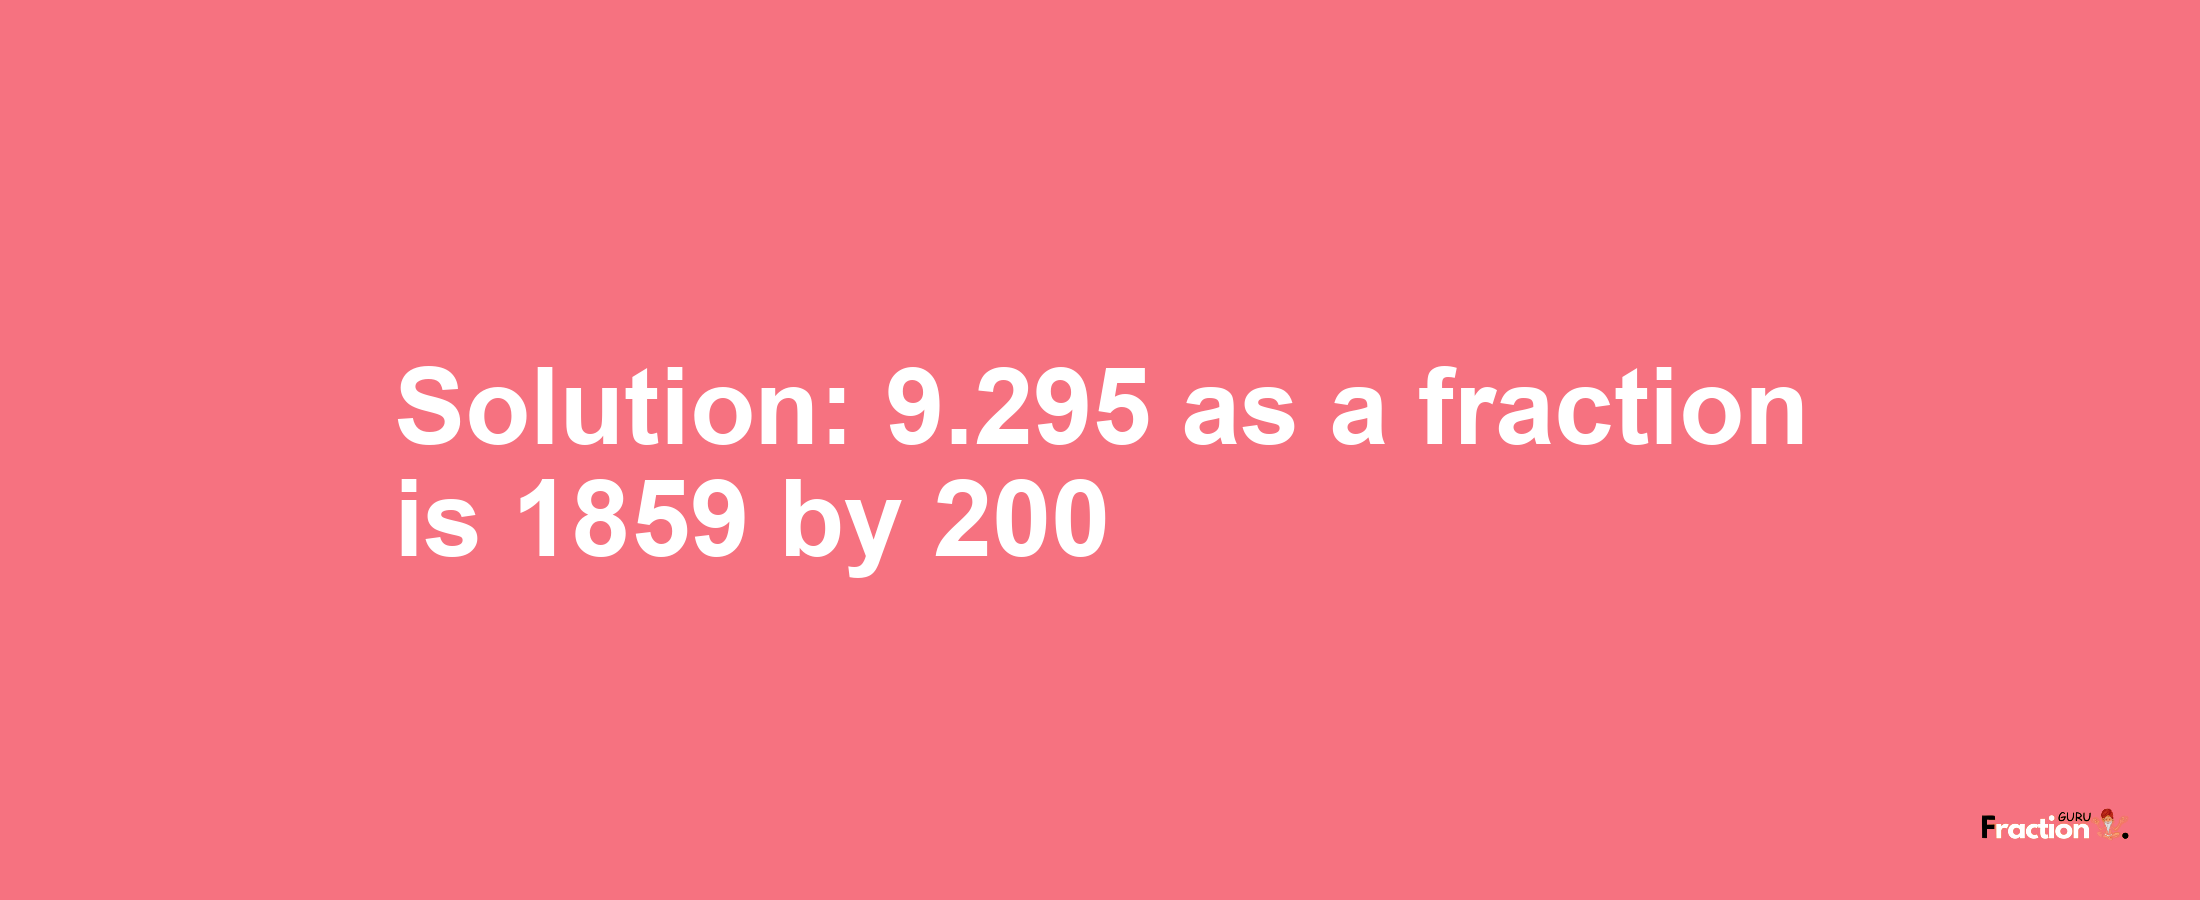 Solution:9.295 as a fraction is 1859/200